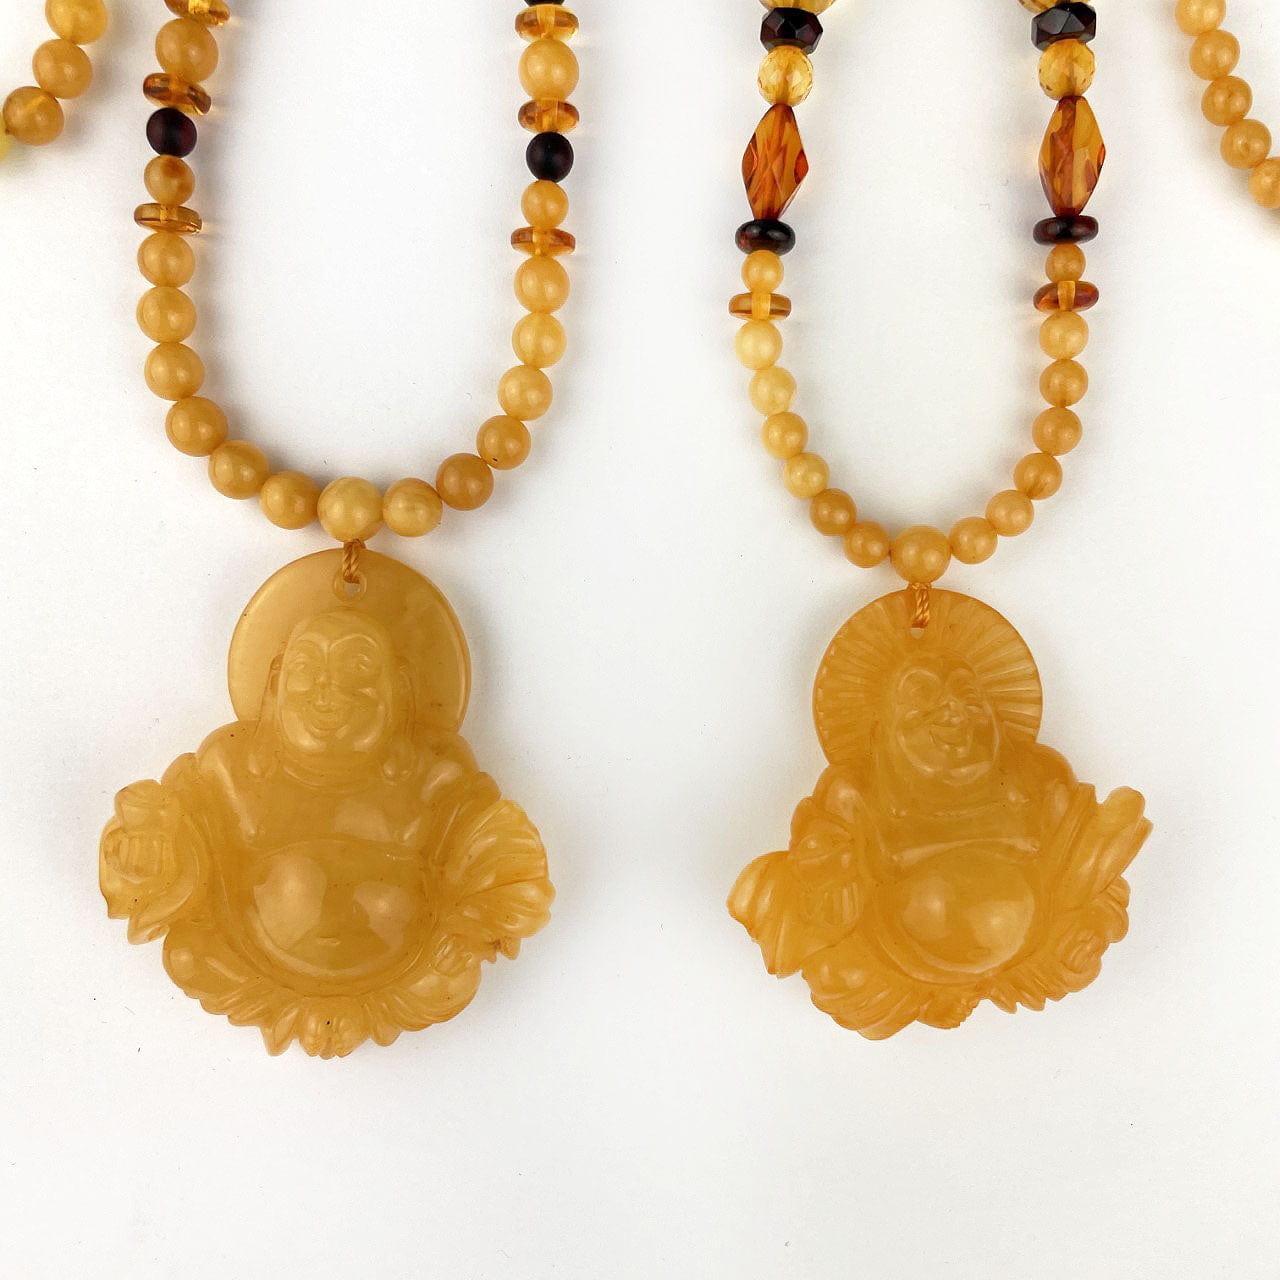 Amber Beaded Necklaces with Carved Buddha Pendants, showing the pendants closer up